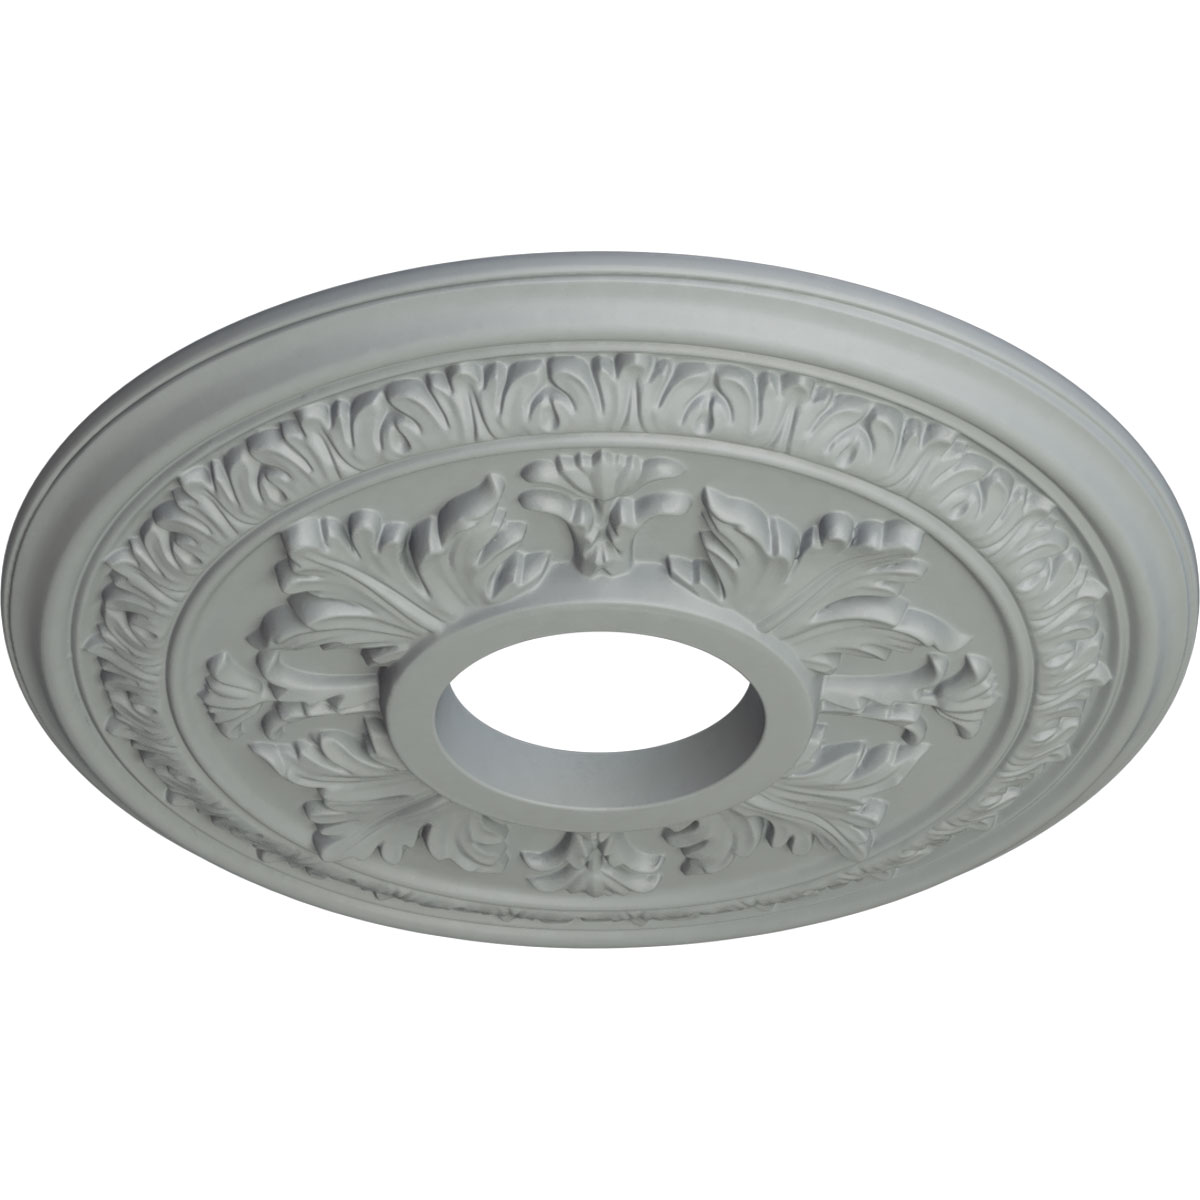 15 3/8-Inch OD x 4 1/4-Inch ID x 1 1/2-Inch P Baltimore Ceiling Medallion  (Fits Canopies up to 5 1/2-Inch )